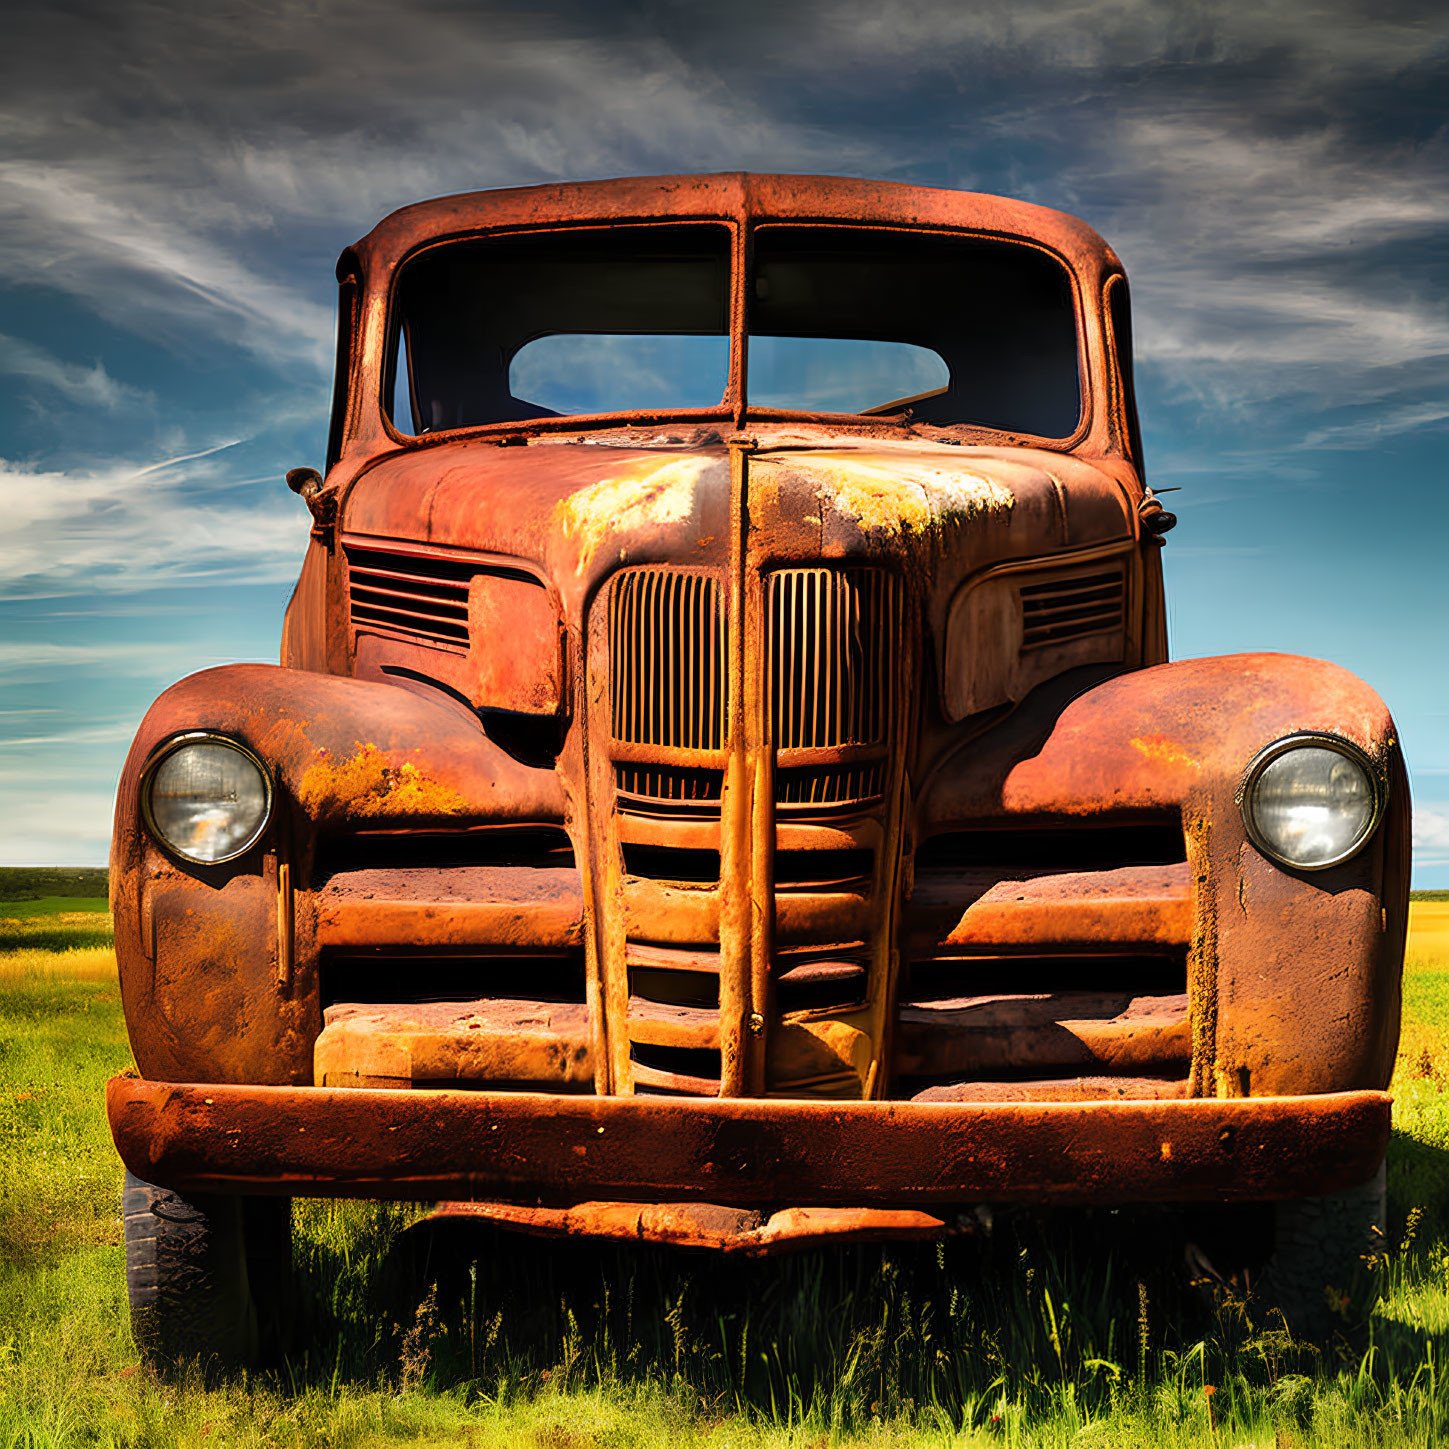 Rusted vintage truck in grassy field under blue sky